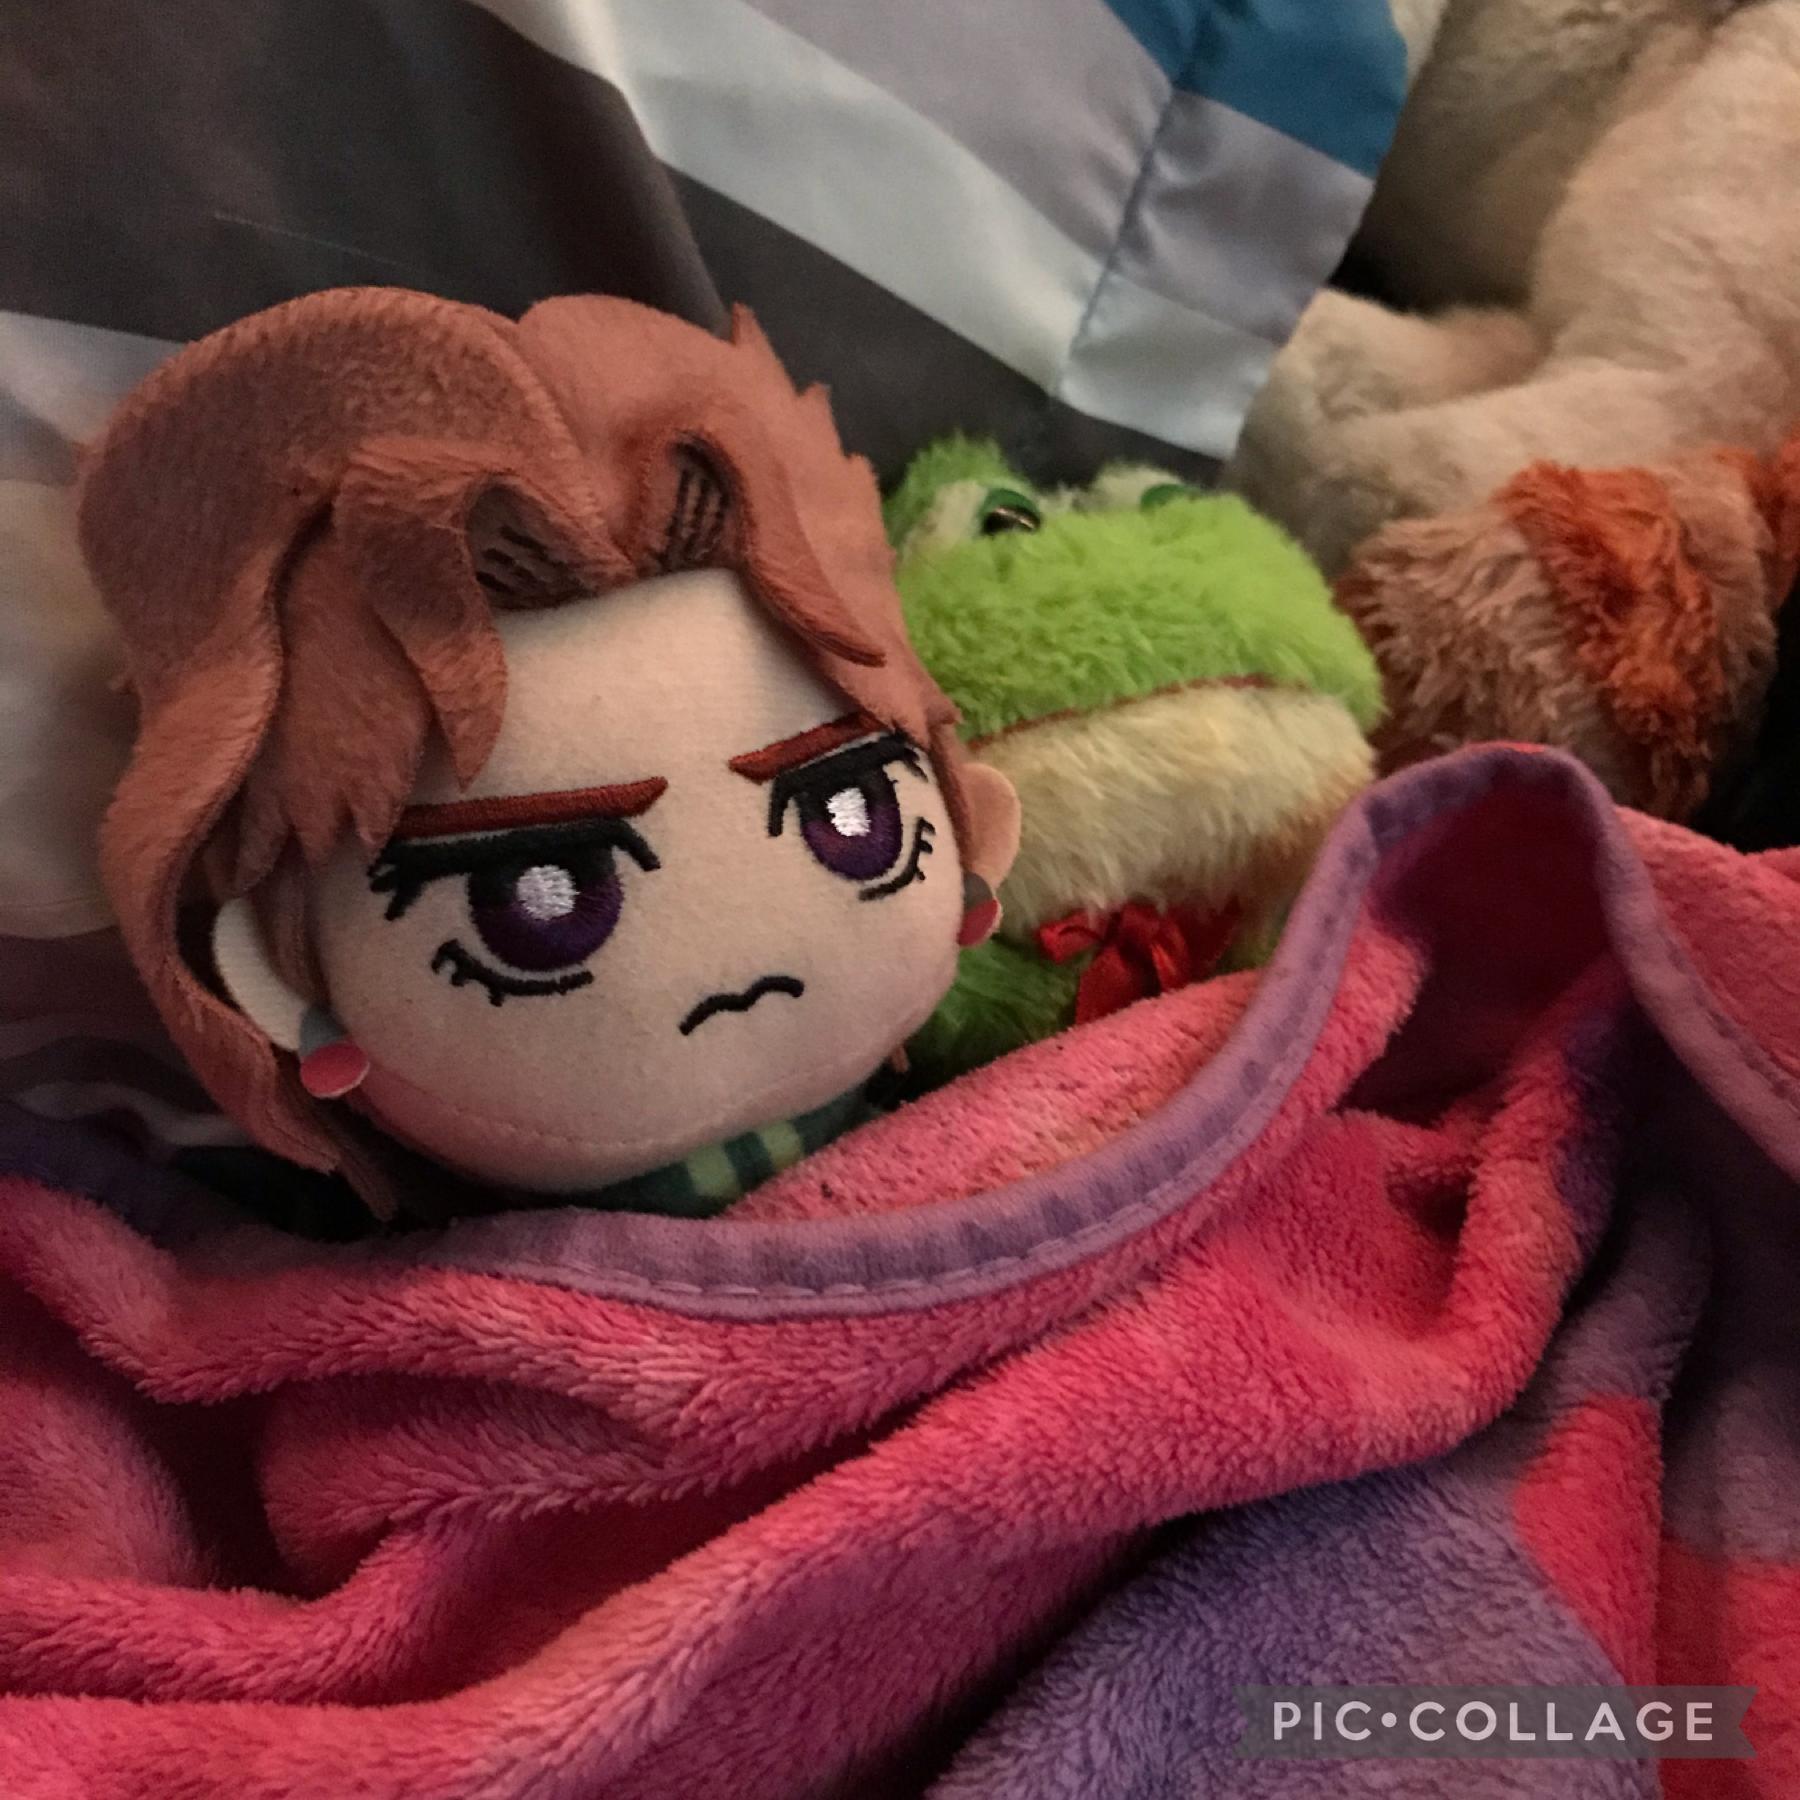 he do look kinda comfy doe 😳 also i’m so sorry if y’all are annoyed by my jojo stuff shdjfk